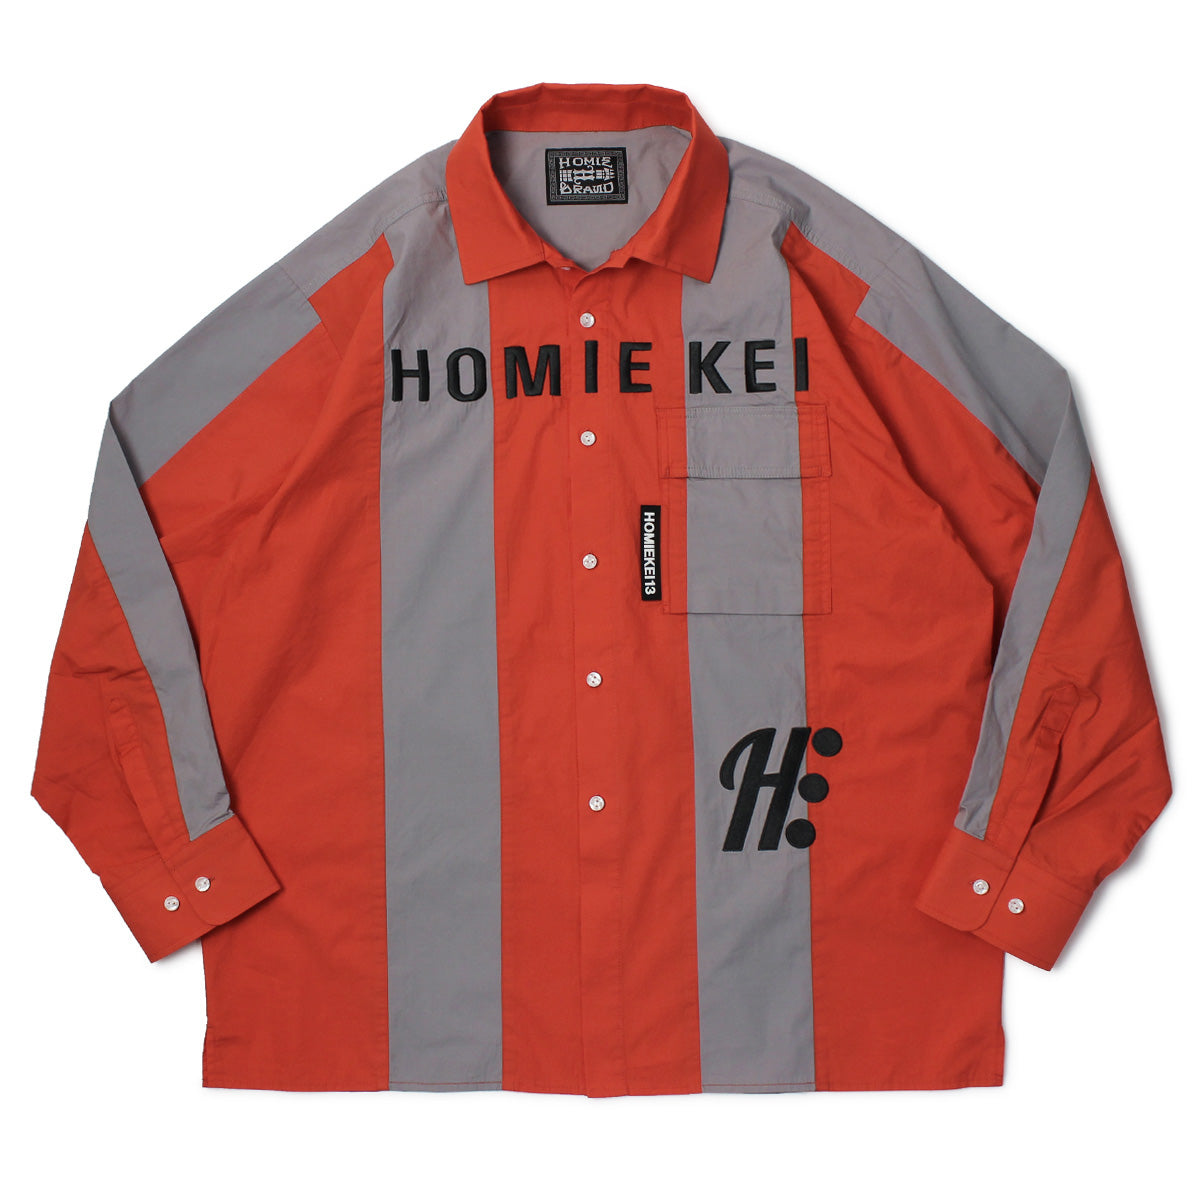 SHIRT COLLECTION – HOMIE KEI